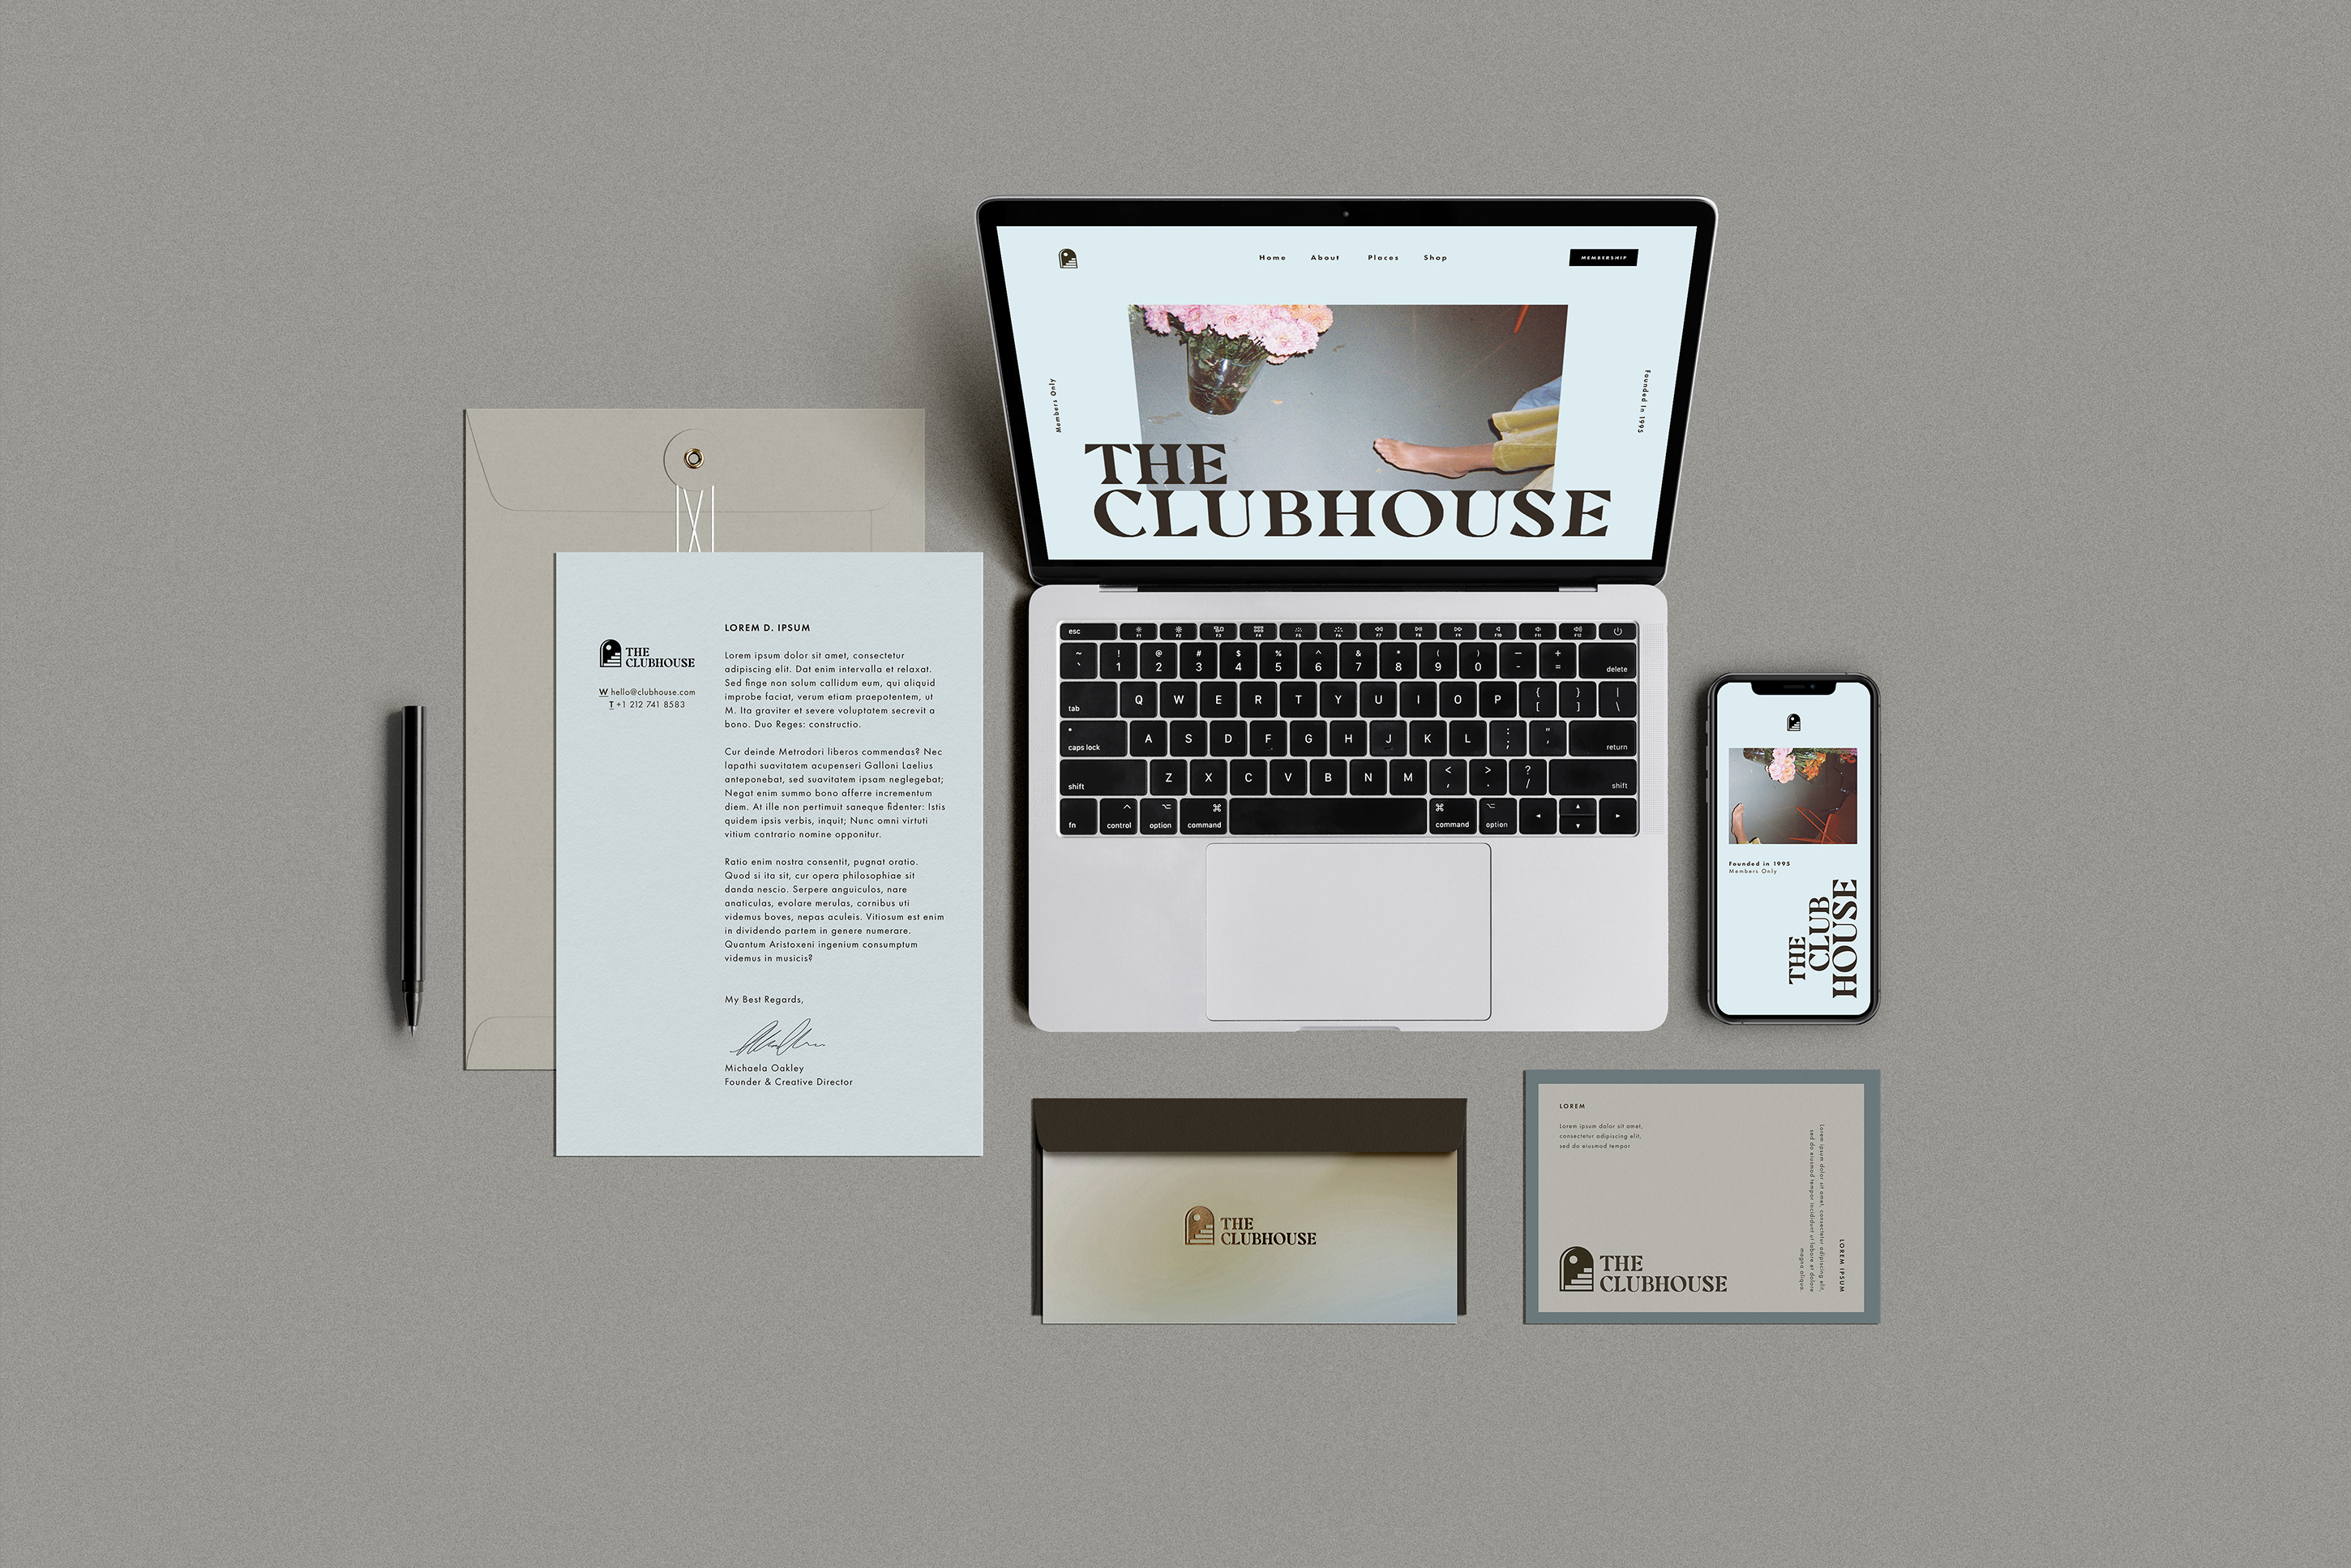 The Clubhouse stationary including an 8.5 inch by 11 inch letter & beige envelope, pen, Macbook & iPhone displaying The Clubhouse landing page, postcards and a dark brown envelope